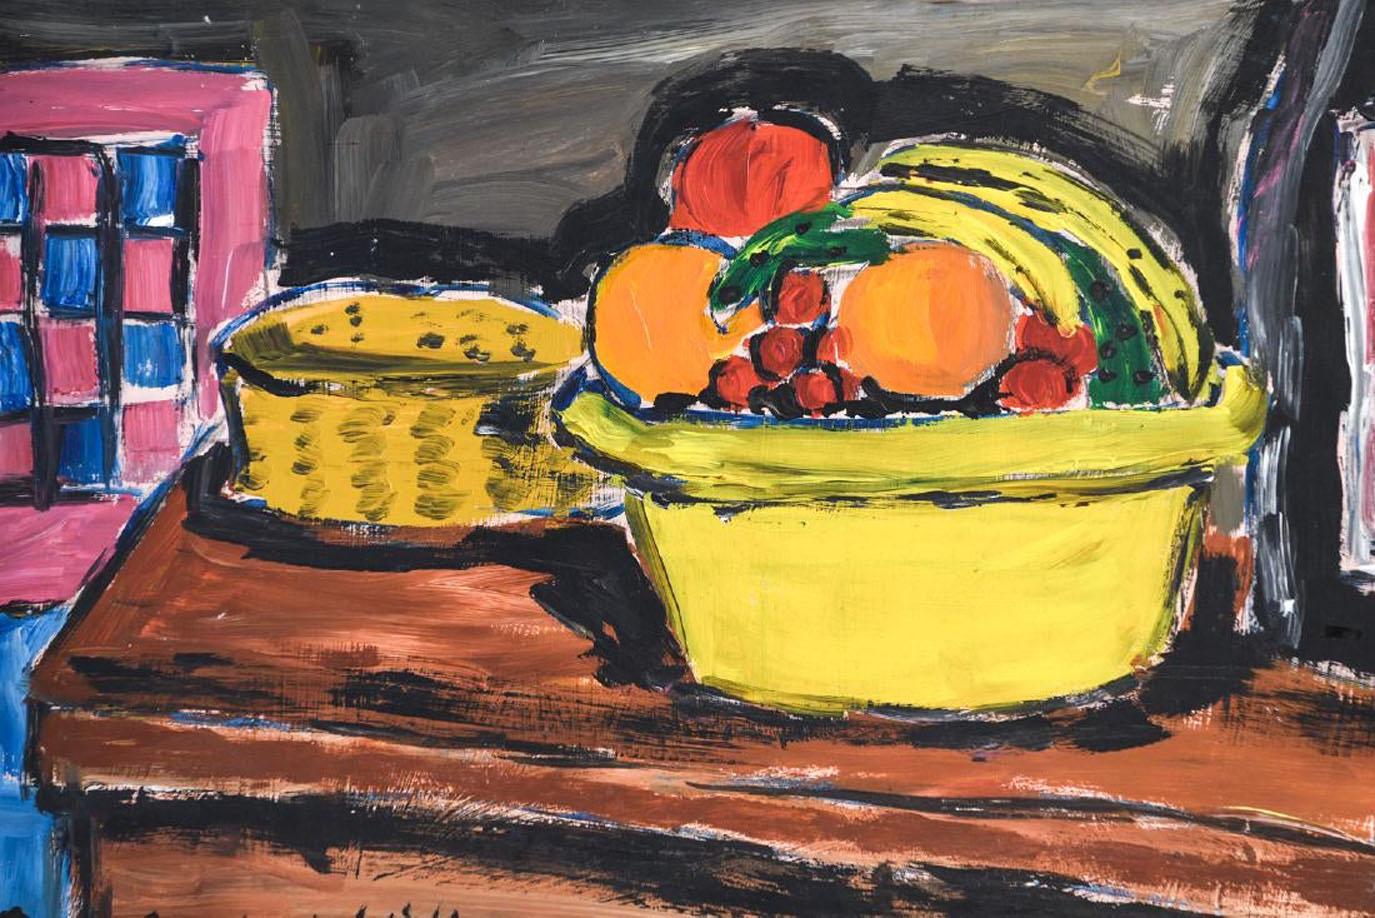 The midcentury still life painting is oil on masonite and is signed in the lower left corner. The focus of the composition is a yellow bowl of bananas, peaches and cherries sitting on a chest next to a woven basket. These objects are outlined in